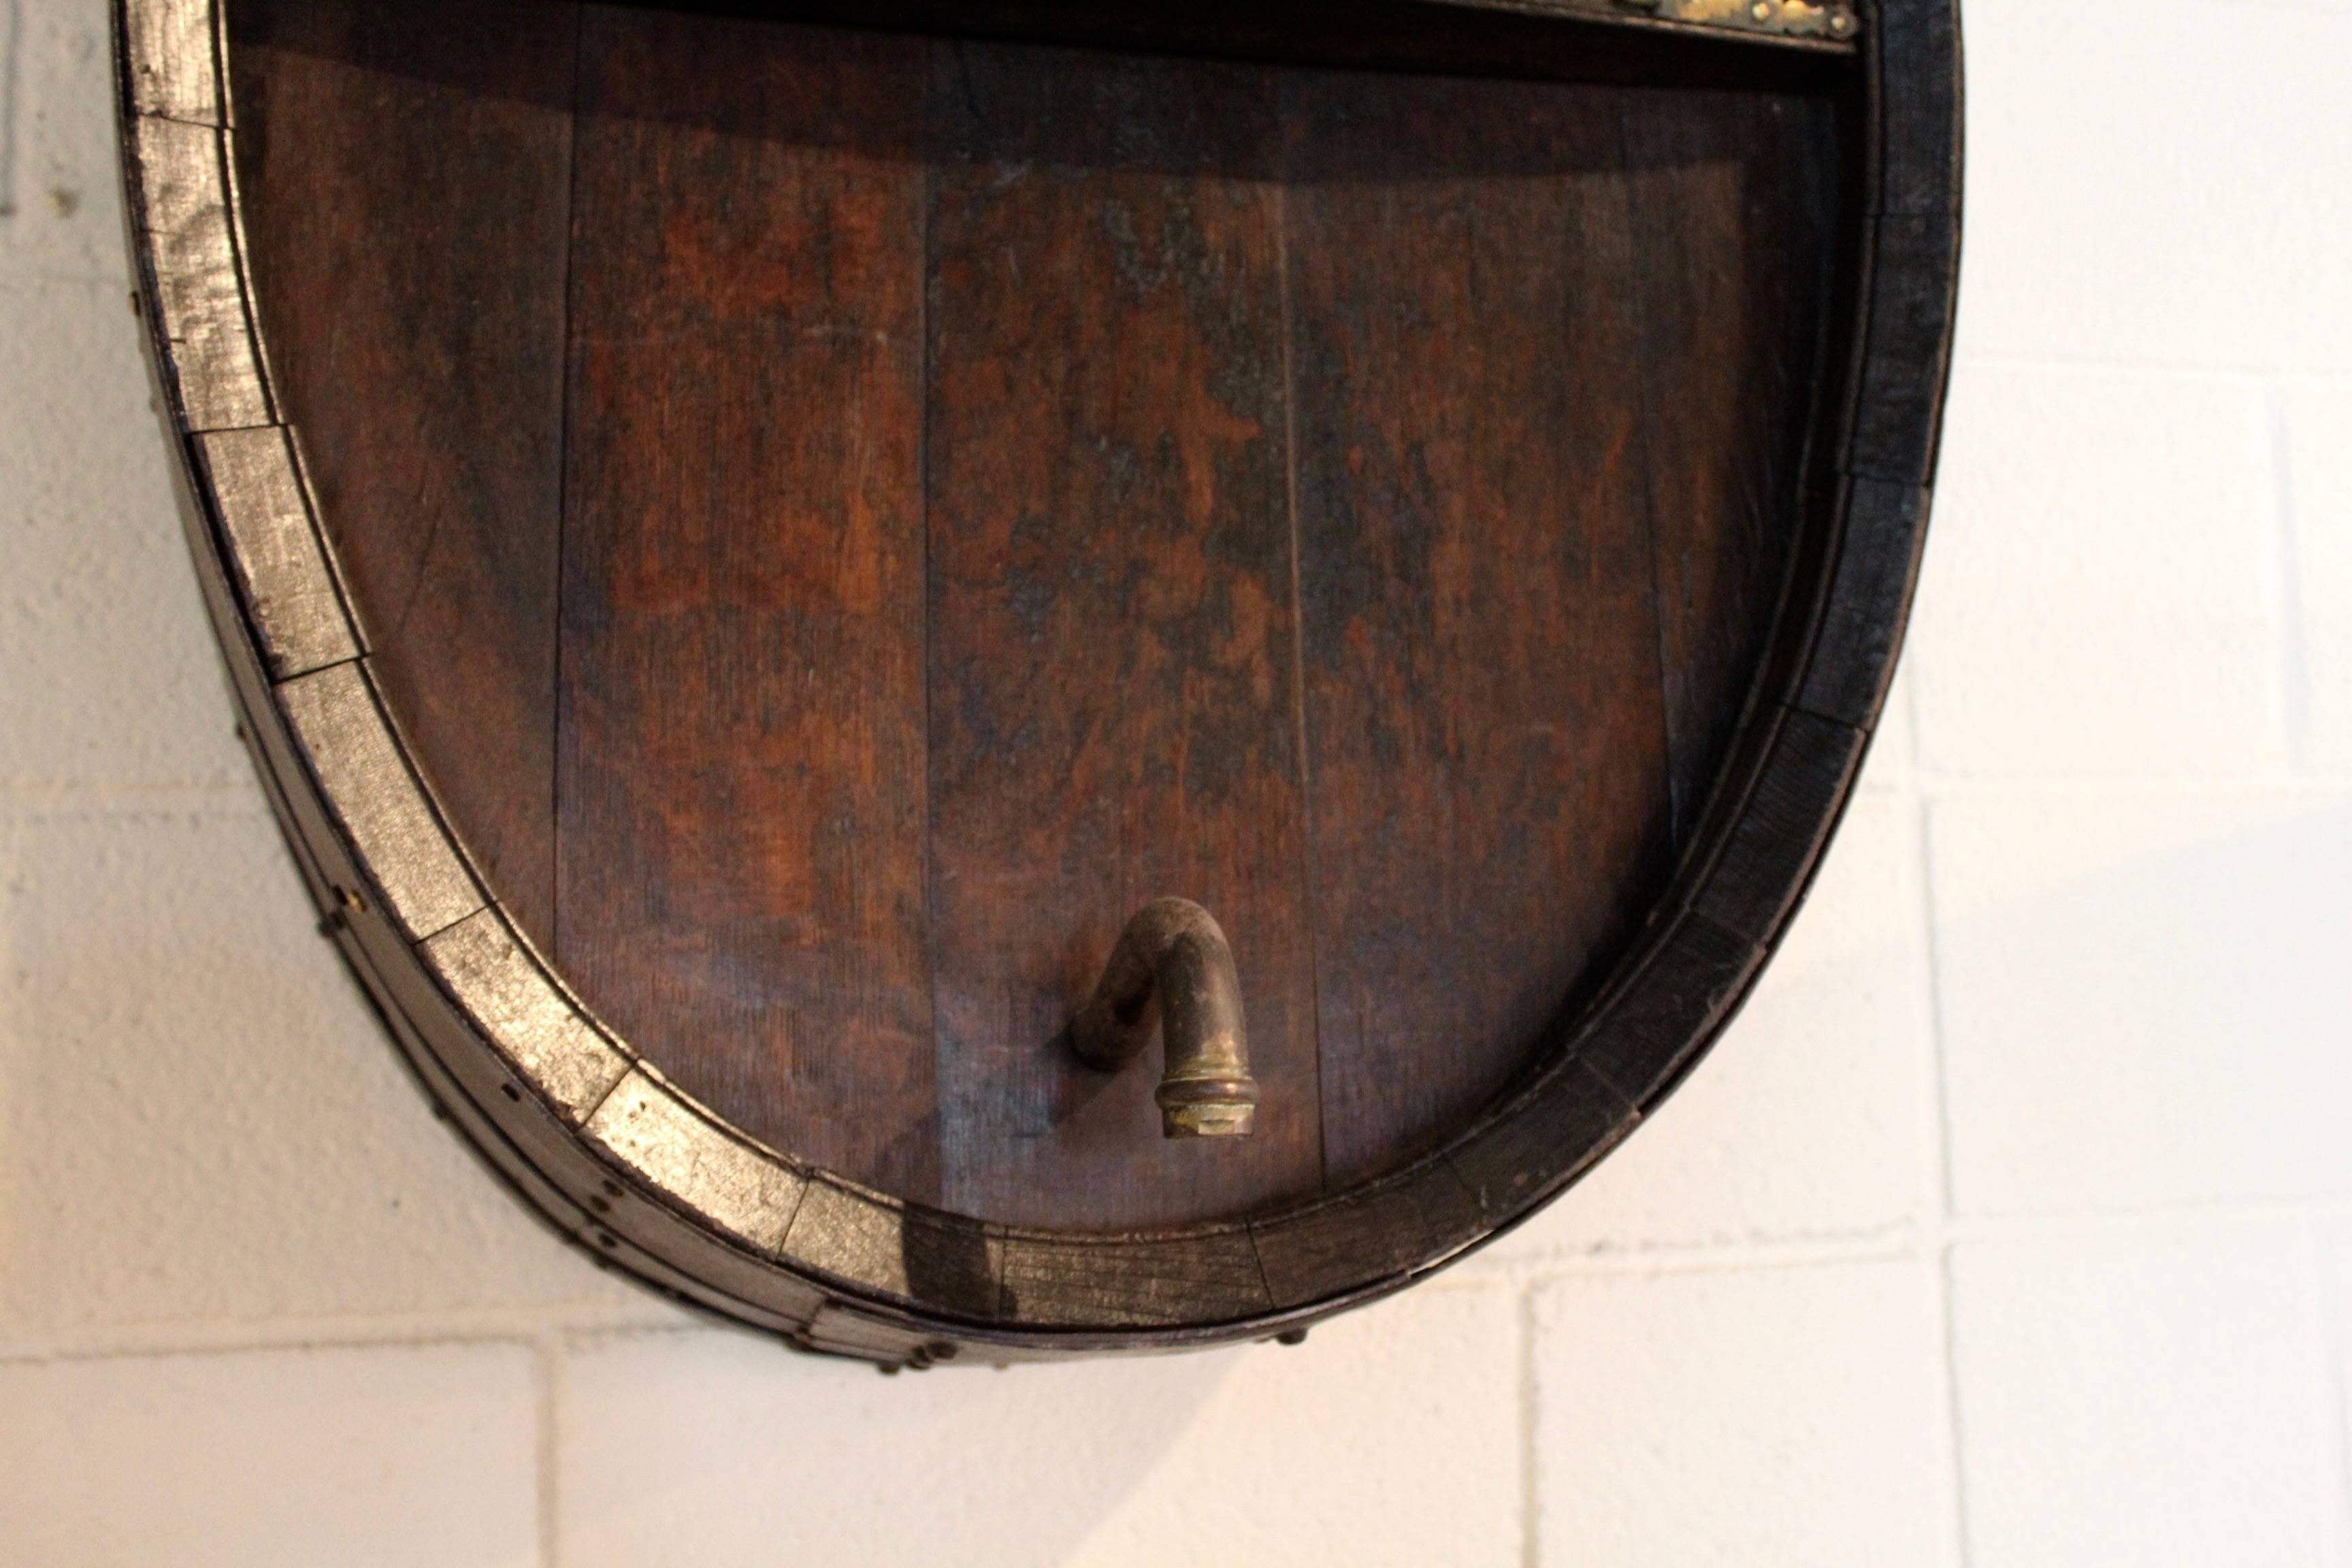 Early 20th Century Antique French Iron Banded Wine Barrel as Wall Decor, circa 1900